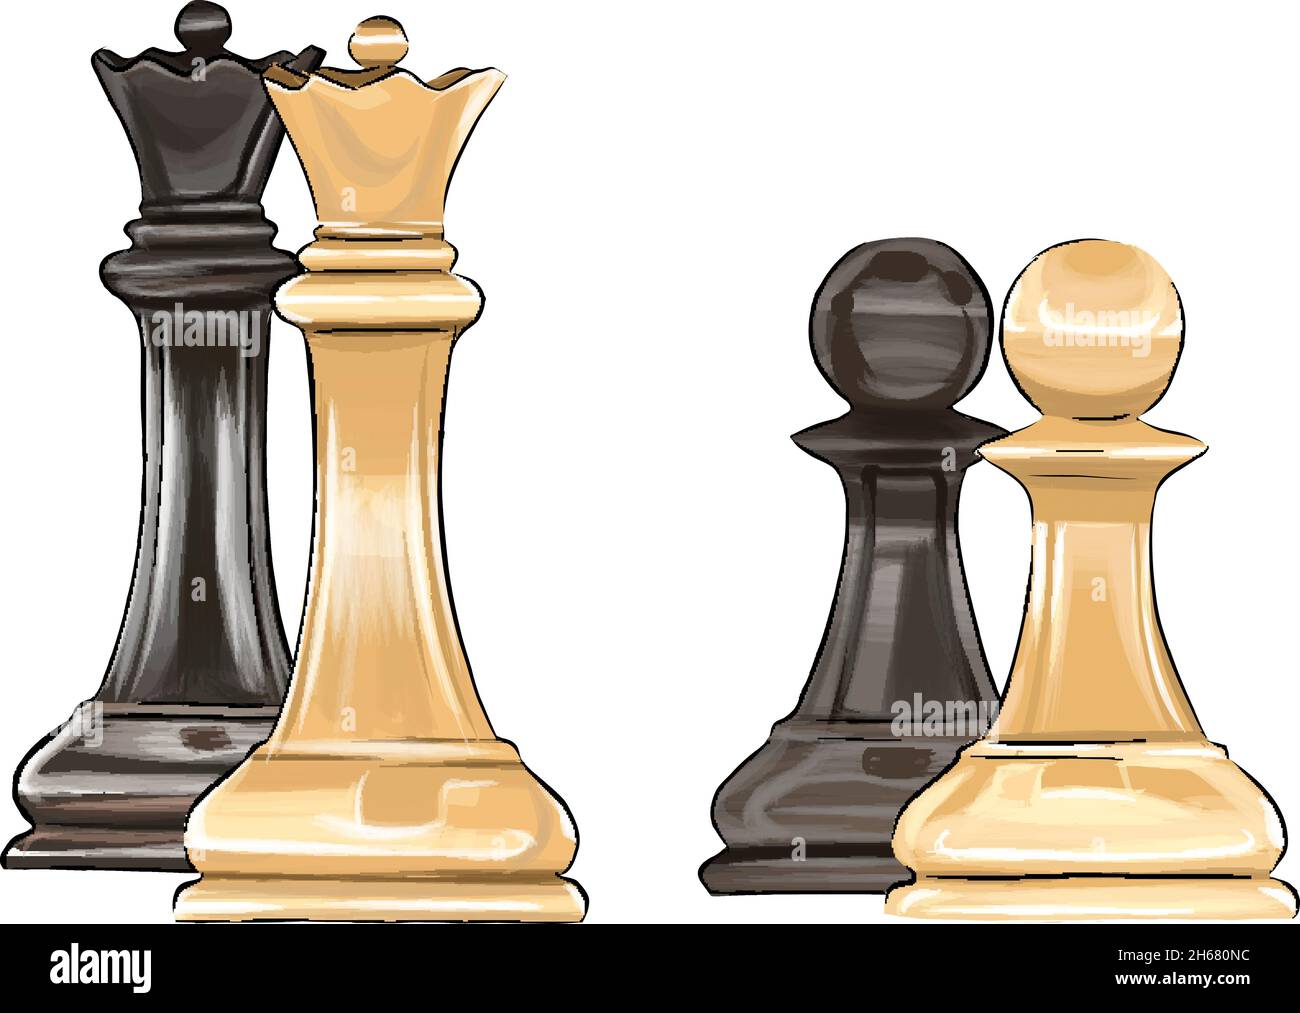 Premium Vector  Chess board game chess pieces from multicolored